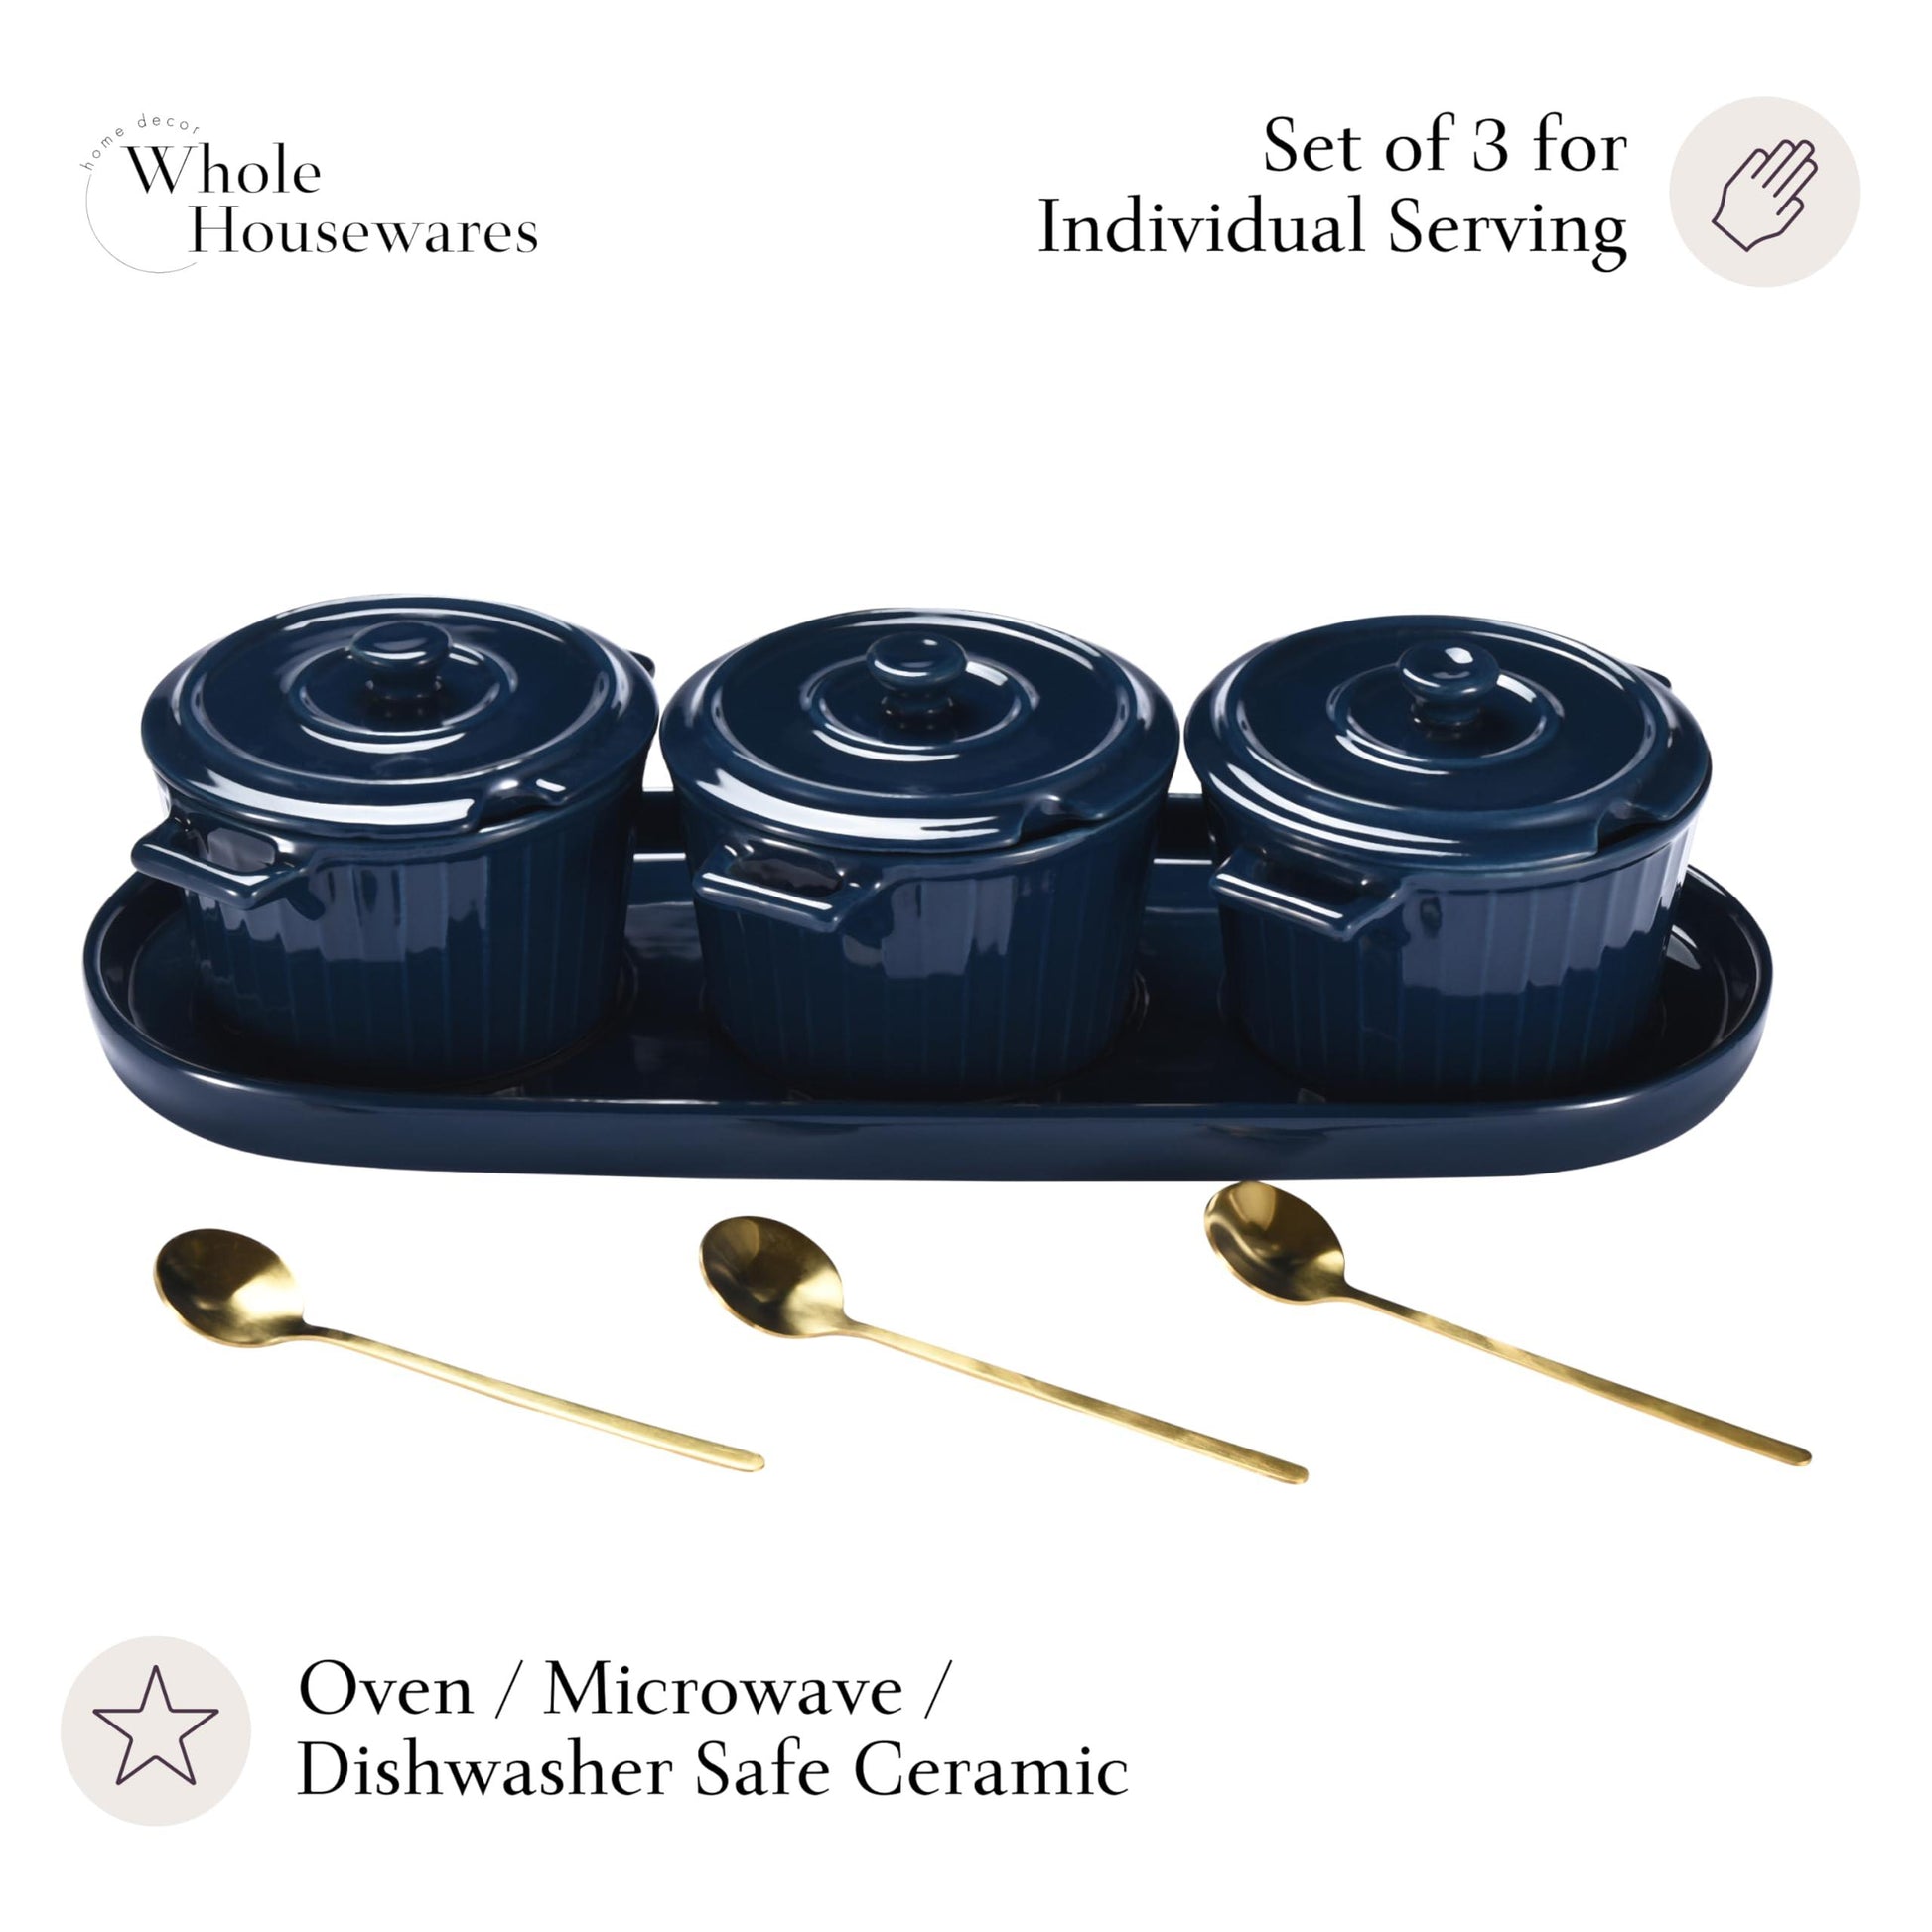 Whole Housewares Mini Cocotte Set with Golden Spoons and Blue Serving Tray - 3 Small Blue Casserole Dishes, 10oz Each with Lids and Handles - Versatile for Baking, Serving, Microwave & Dishwasher Safe - CookCave